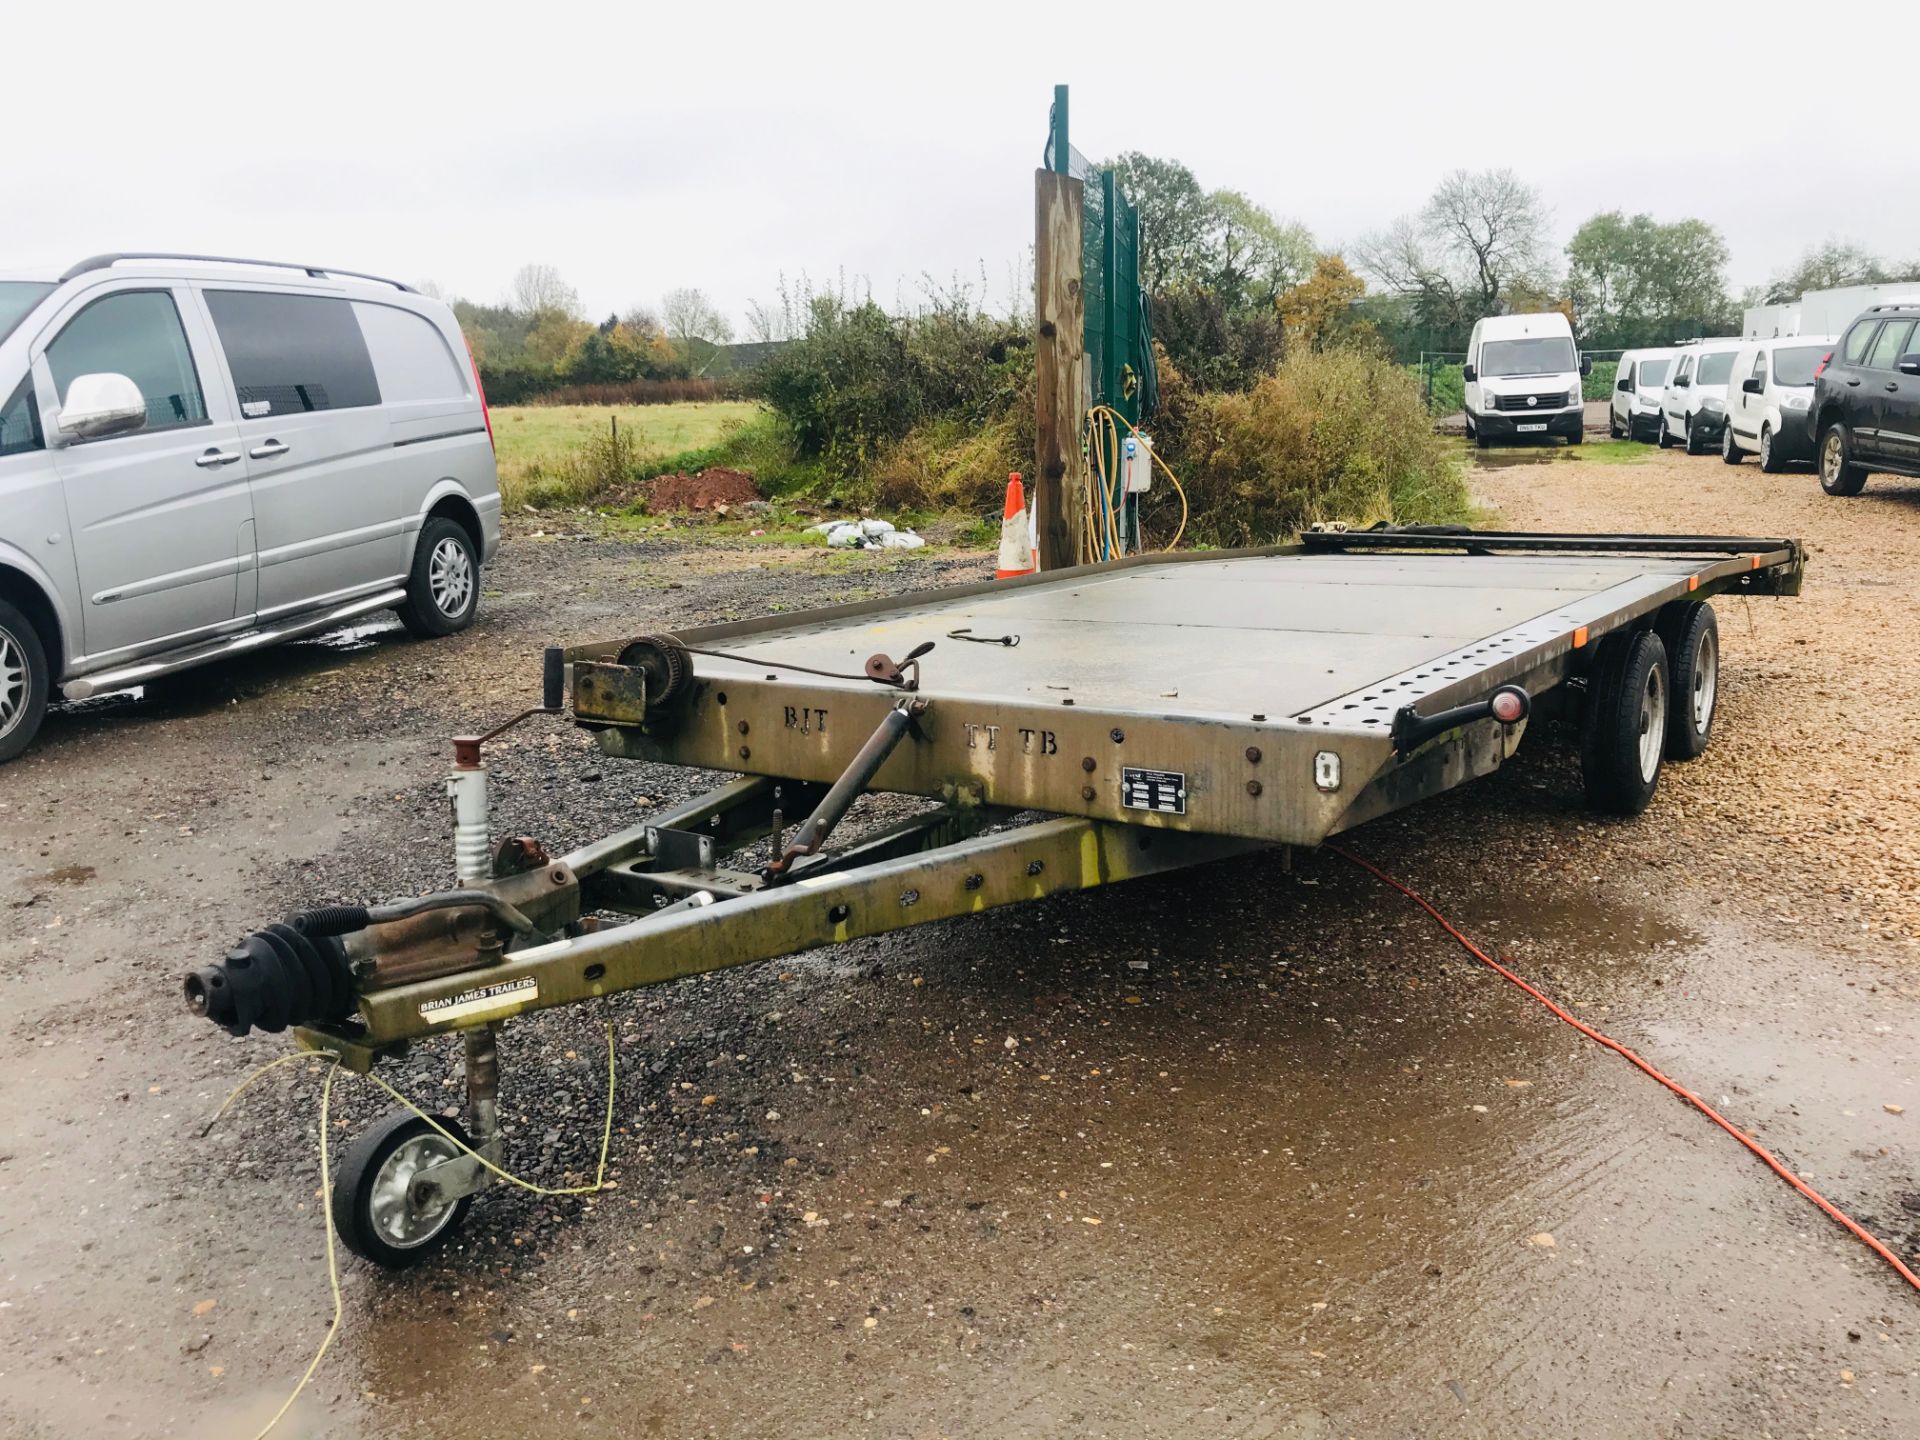 On Sale BRIAN JAMES CAR TRANSPORTER / RECOVERY TRAILER - 18 FOOT LONG - LATE MODEL